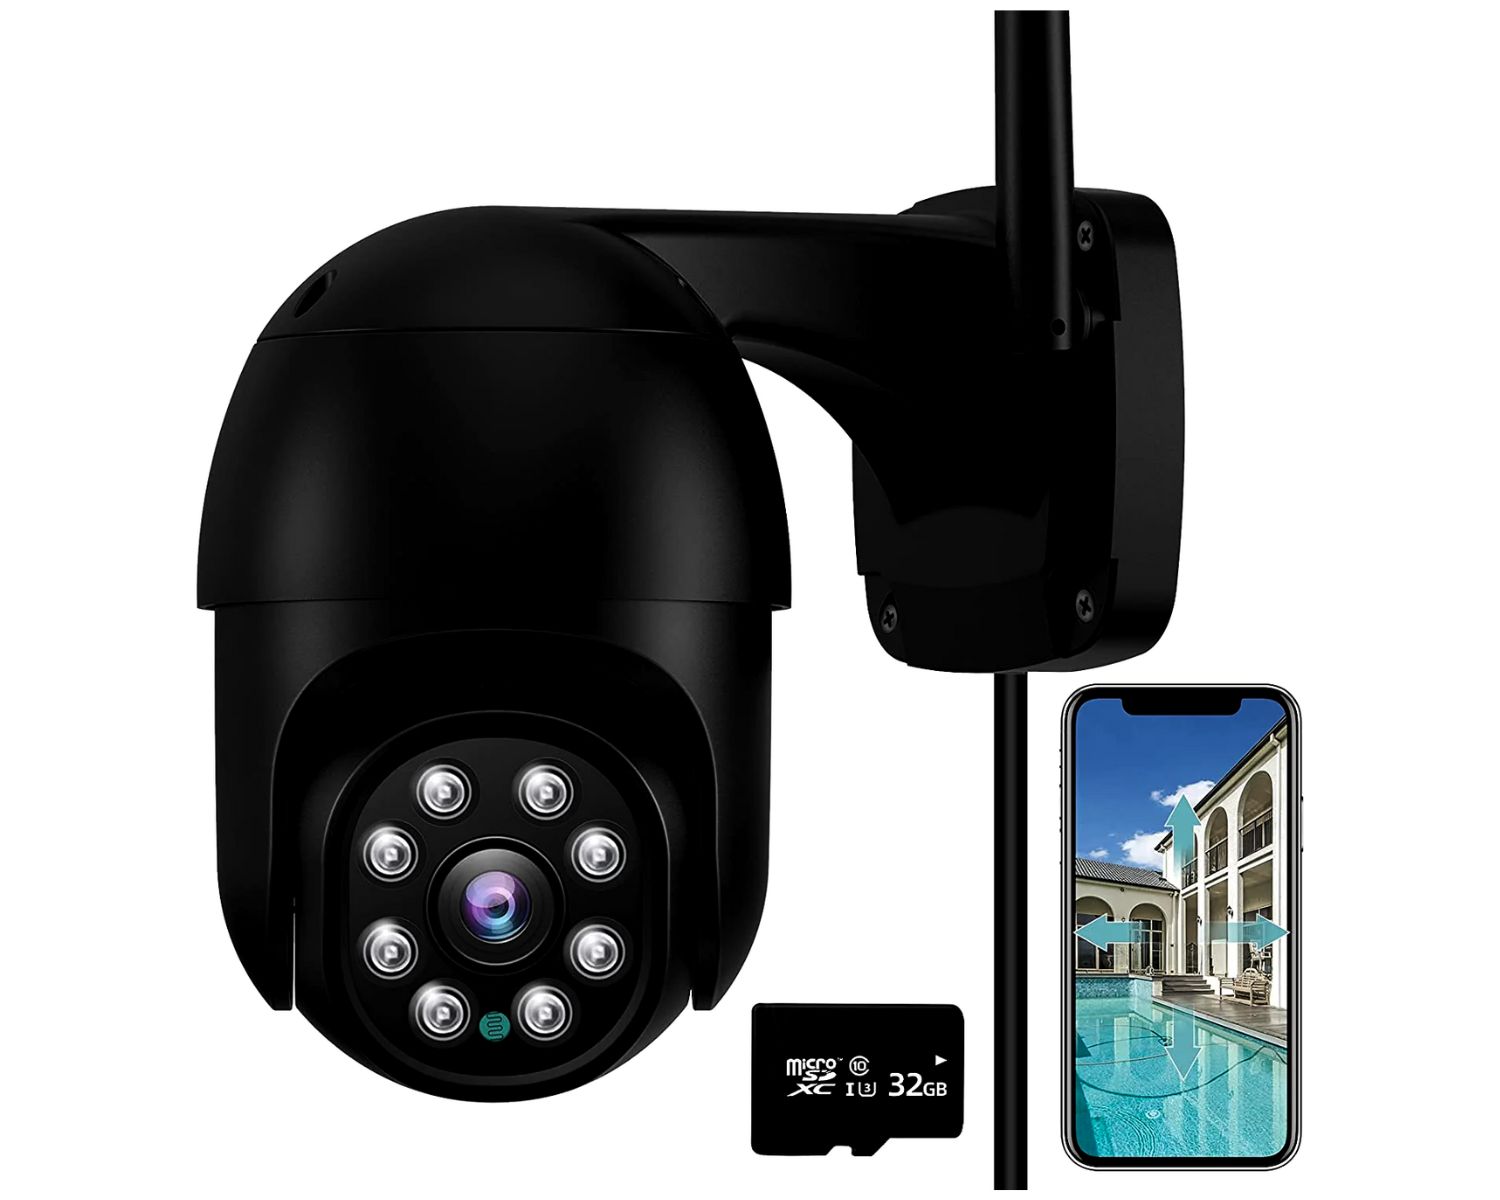 How To Install MIPC Outdoor Camera